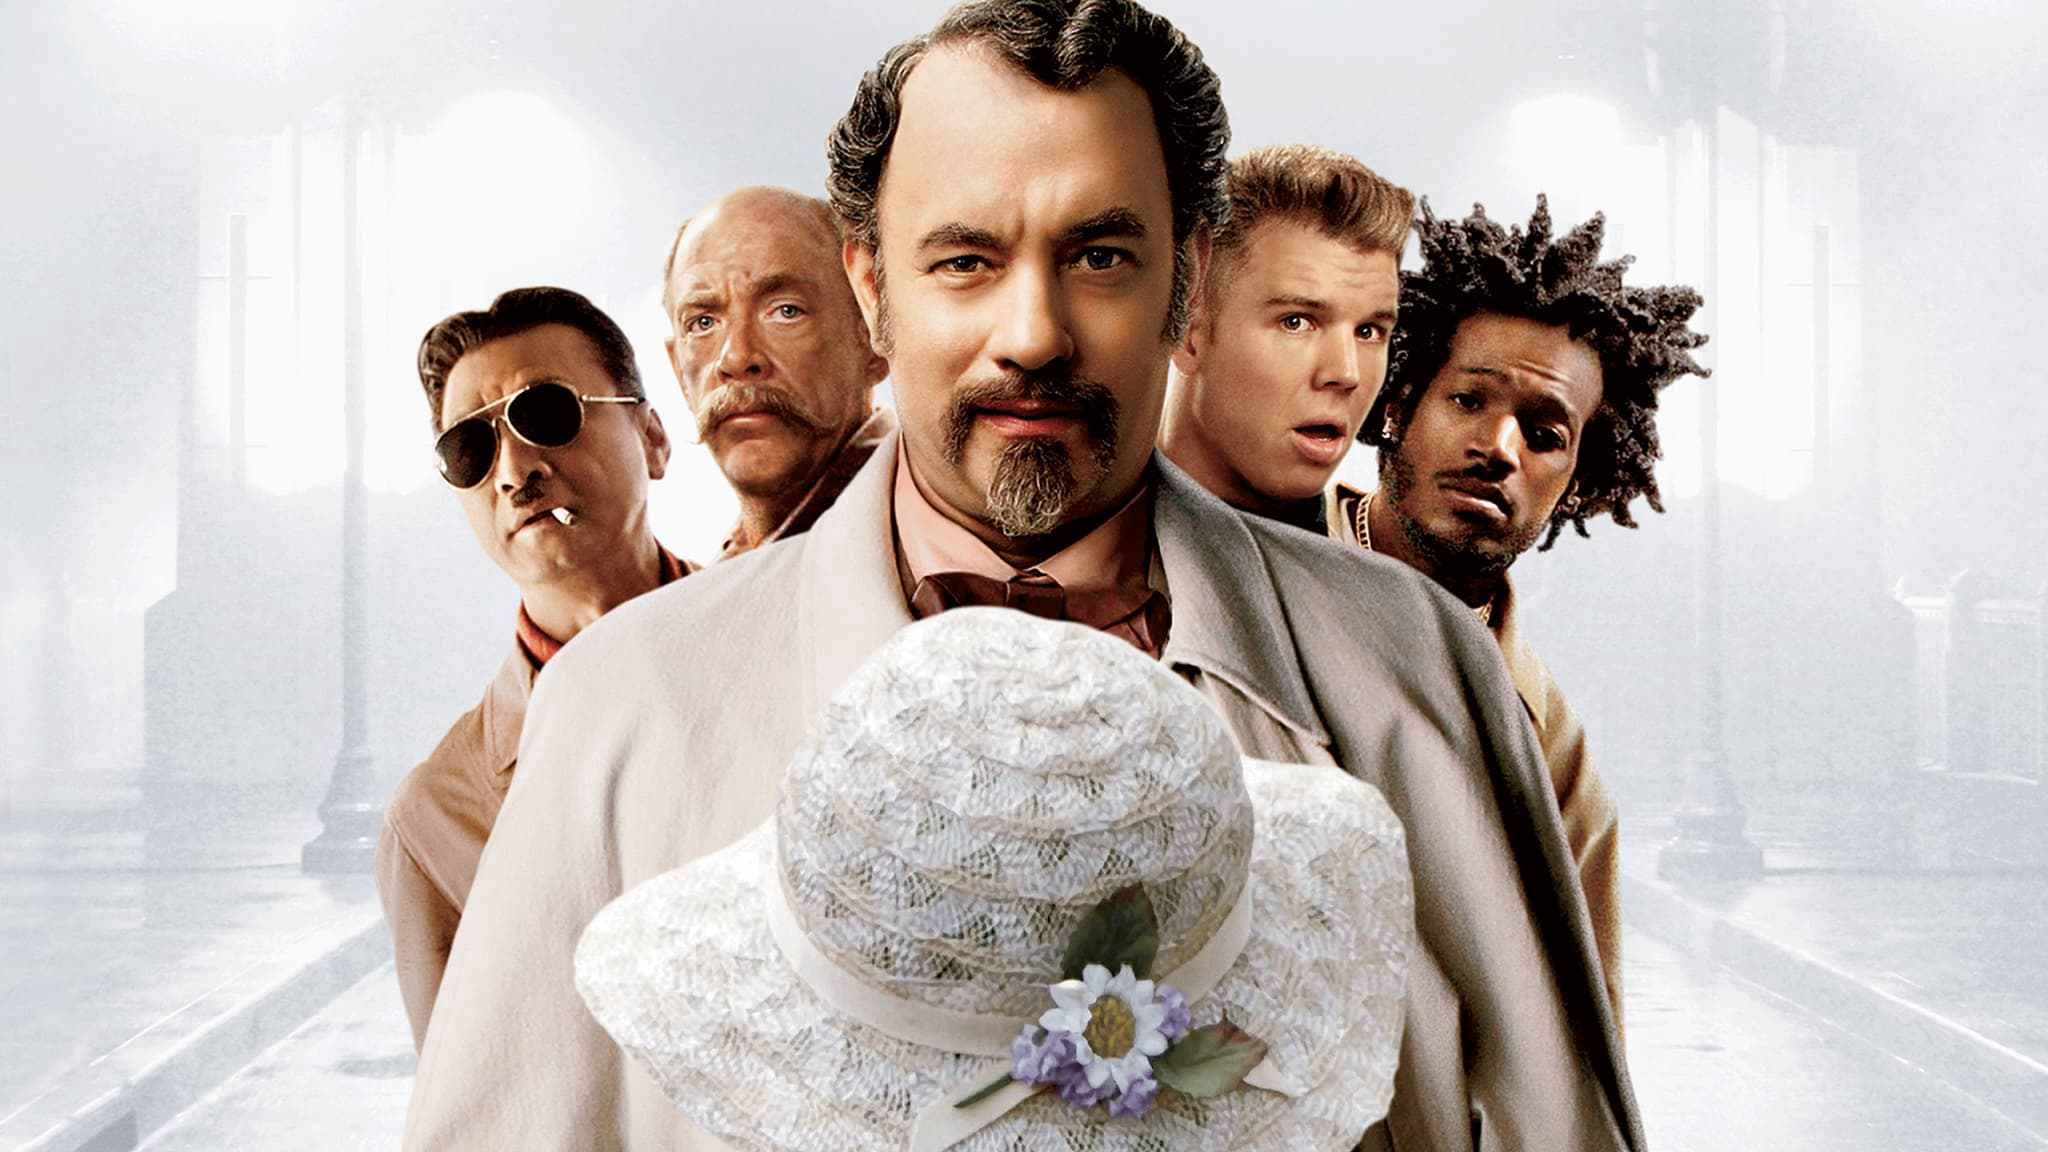 The Ladykillers / The Ladykillers (2004)